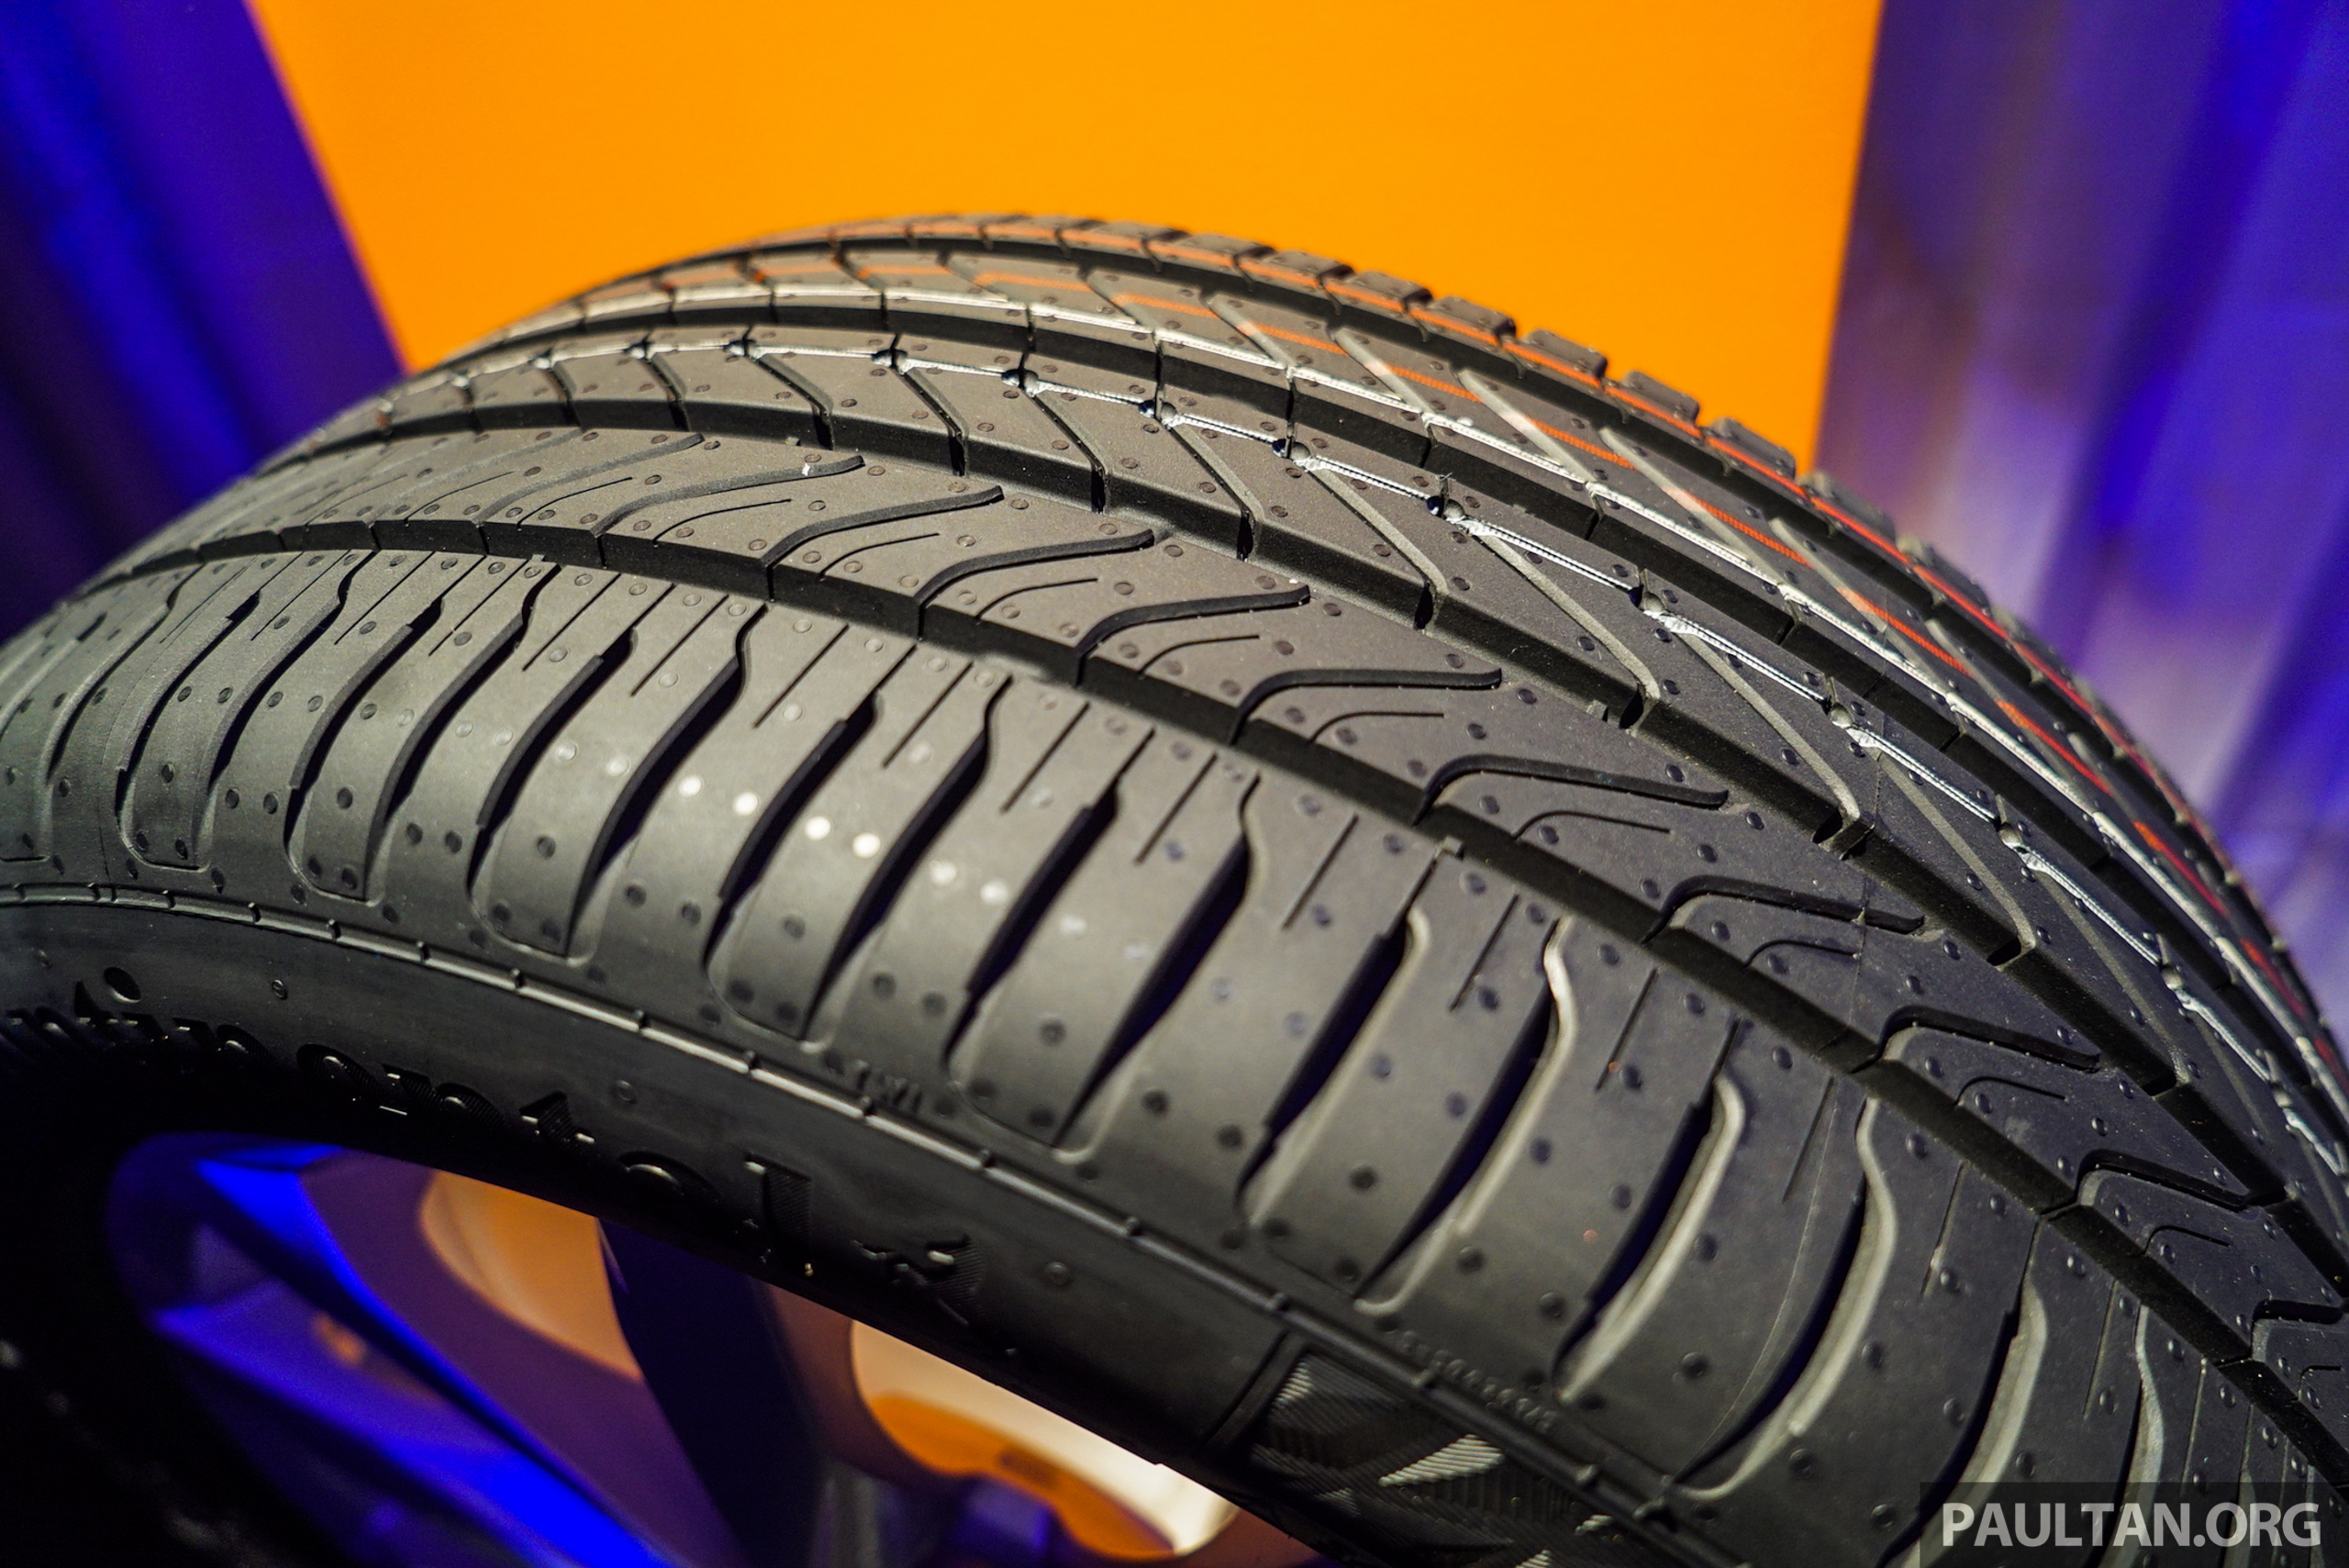 Continental ultracontact uc6. Continental ULTRACONTACT 225/50 r17 94v. Continental ULTRACONTACT uc6 205/55 r16. Continental ULTRACONTACT 6.